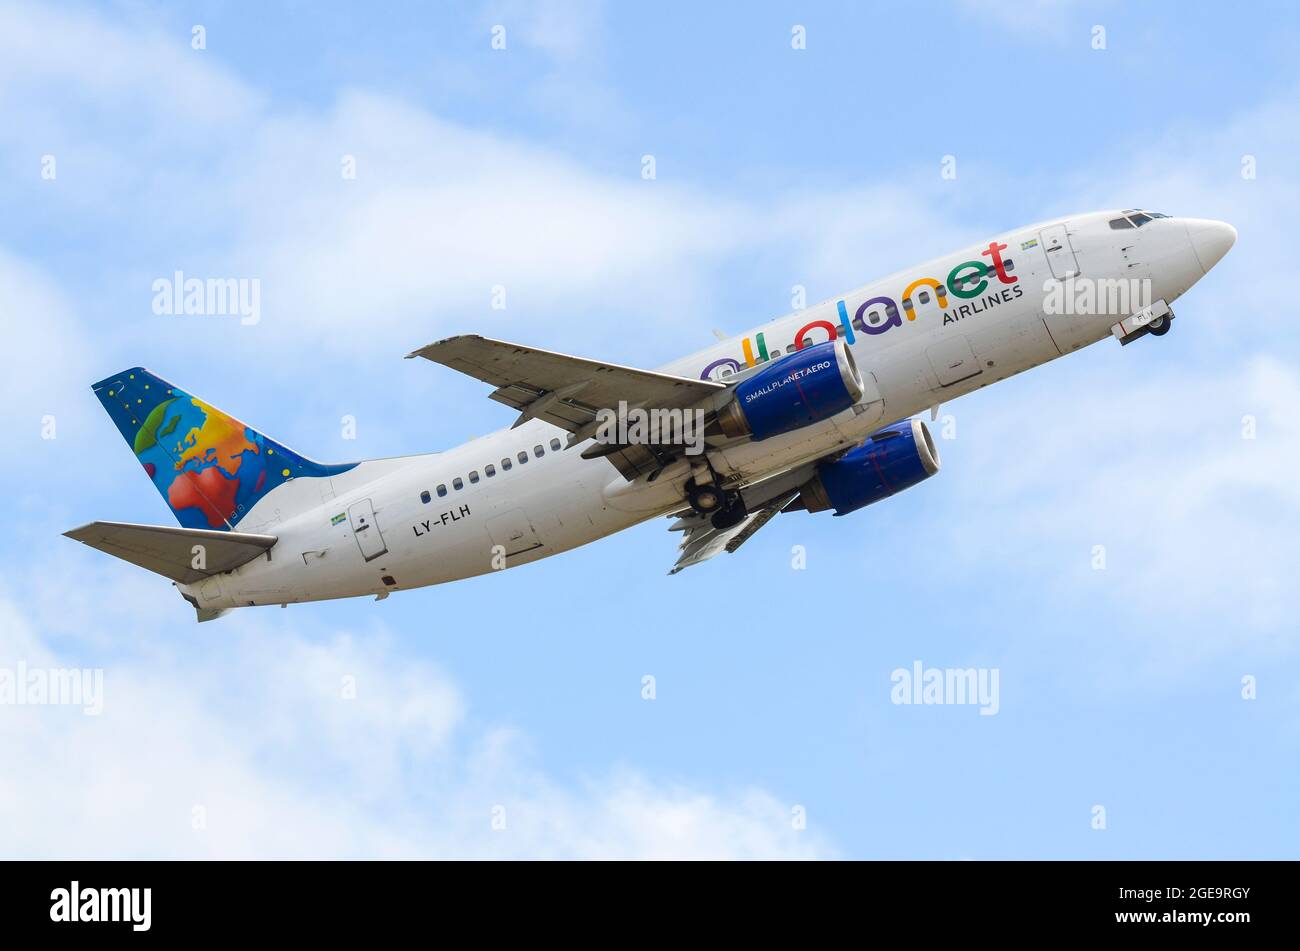 Small Planet Airlines Boeing 737 jet airliner plane LY-FLH taking off from Manston Airport, Kent, UK. Climbing departure Stock Photo